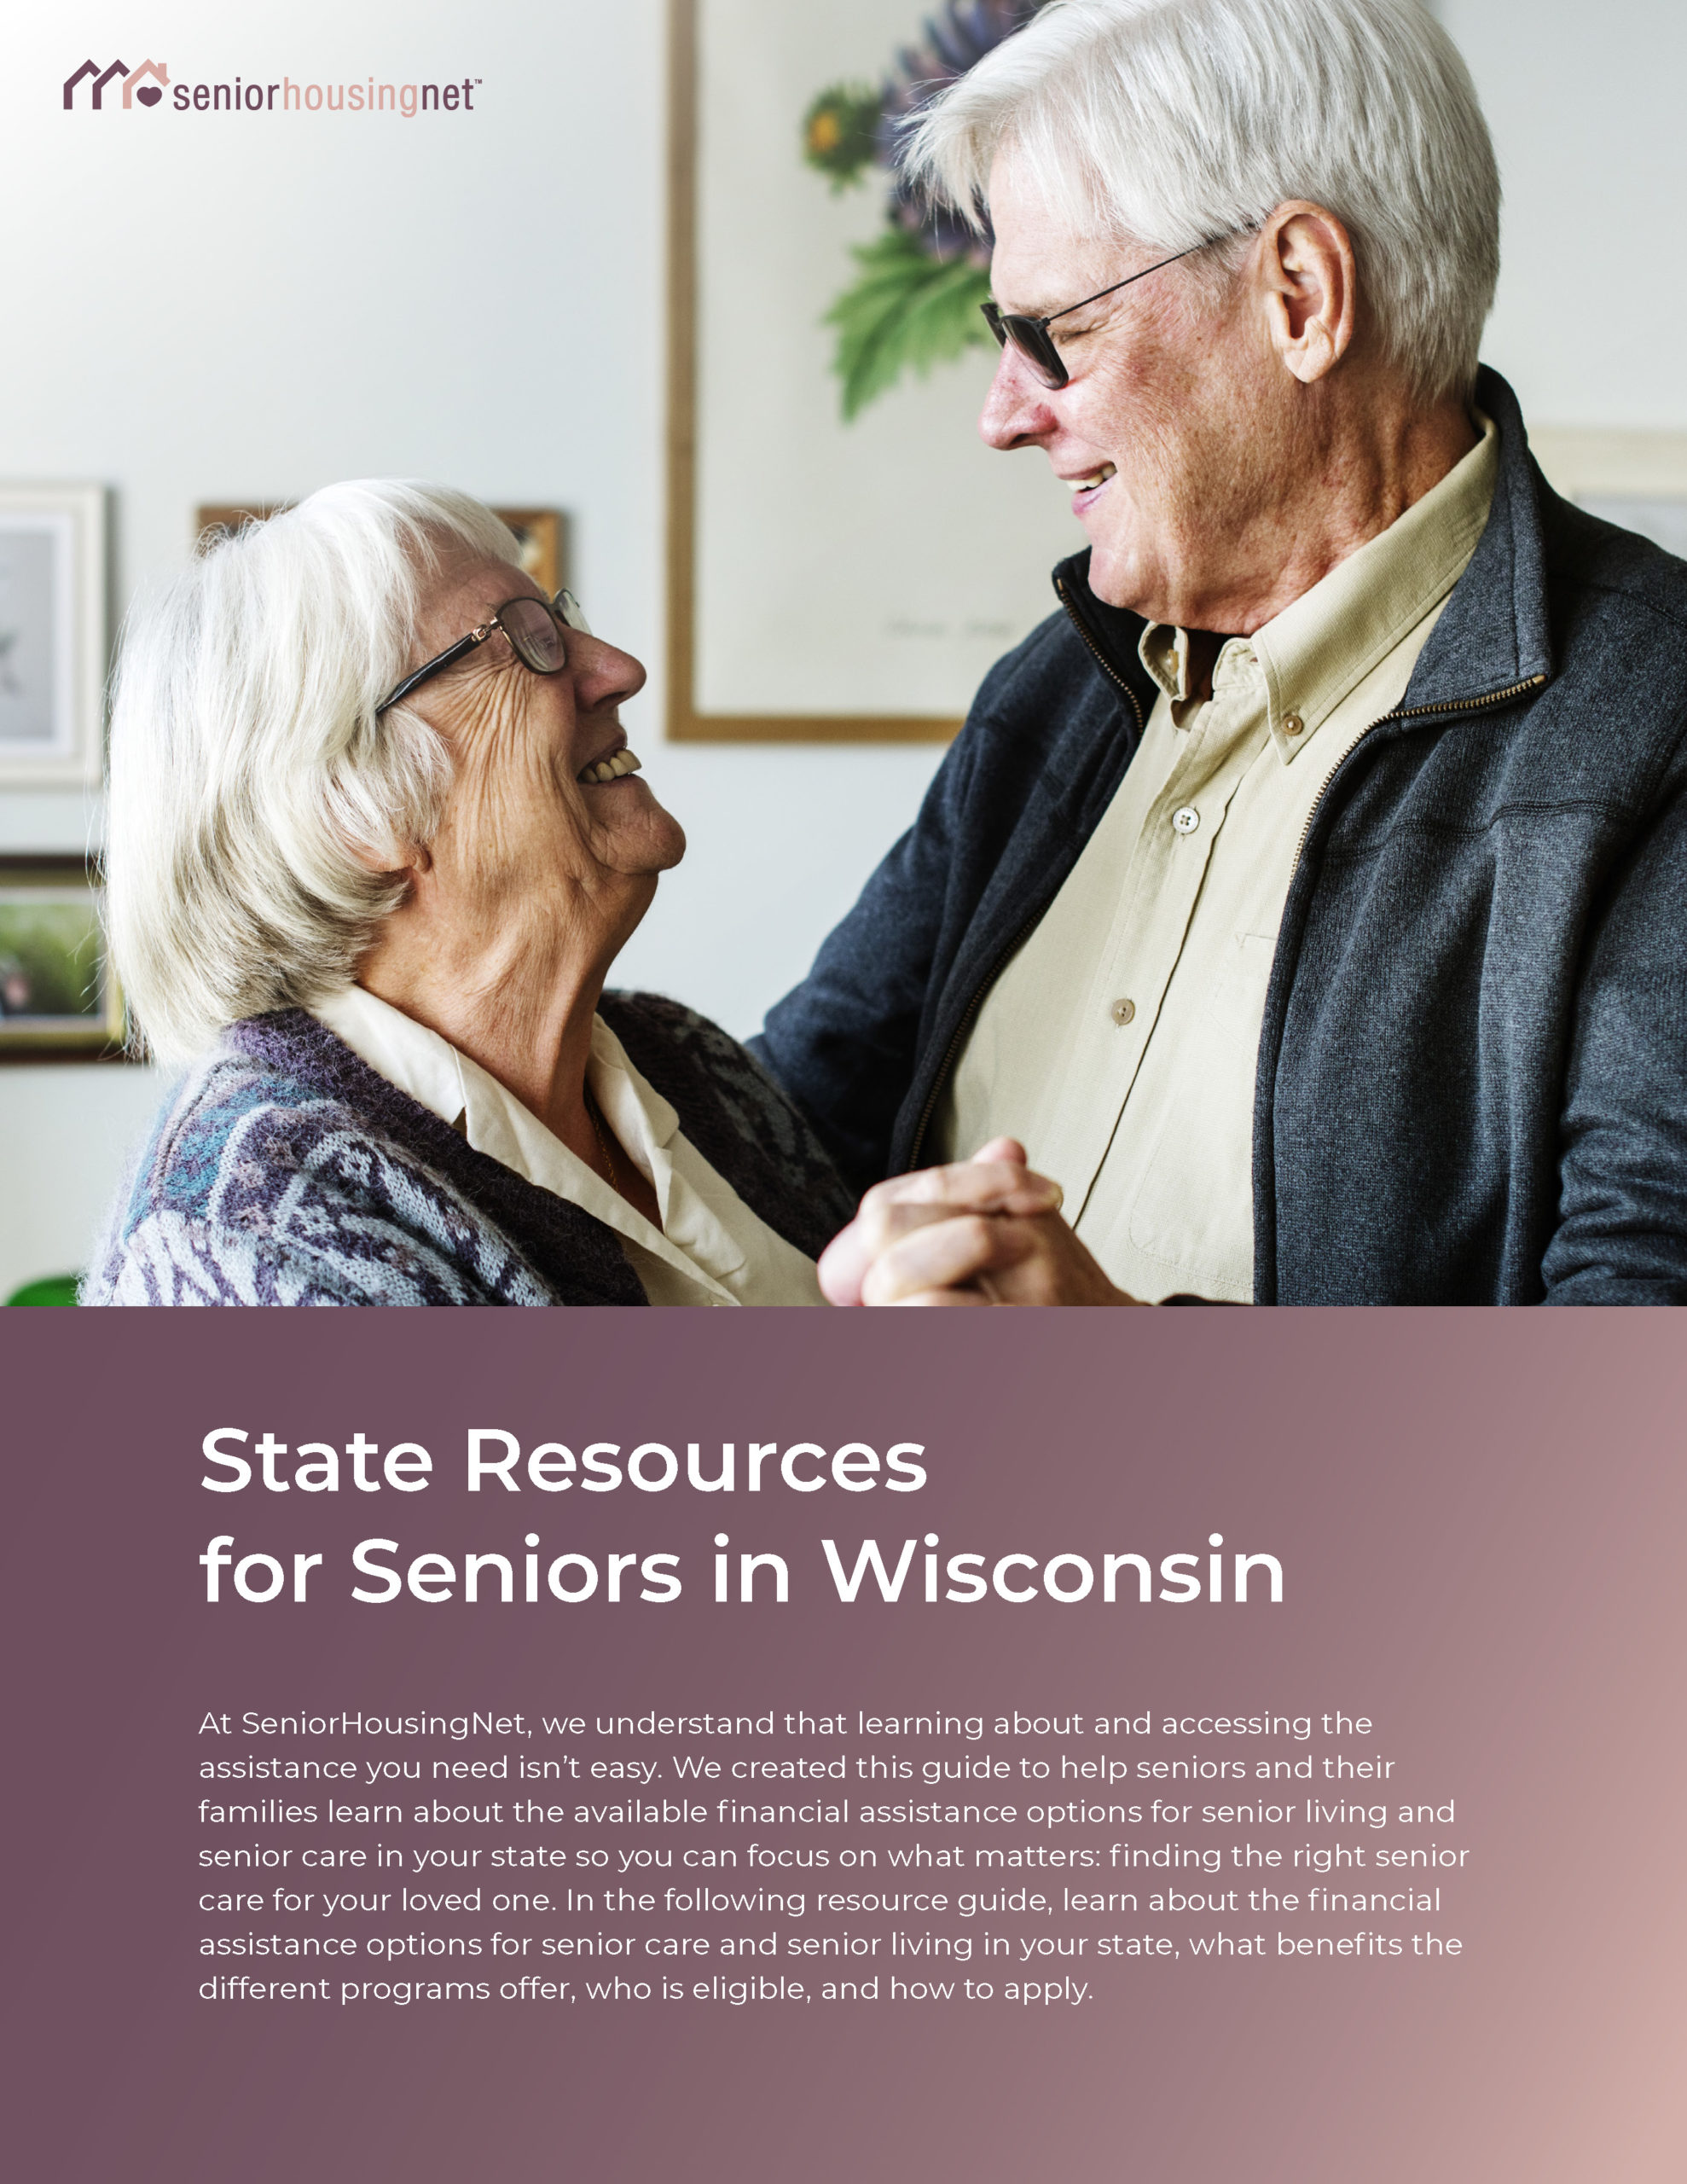 State Resources for Seniors in Wisconsin